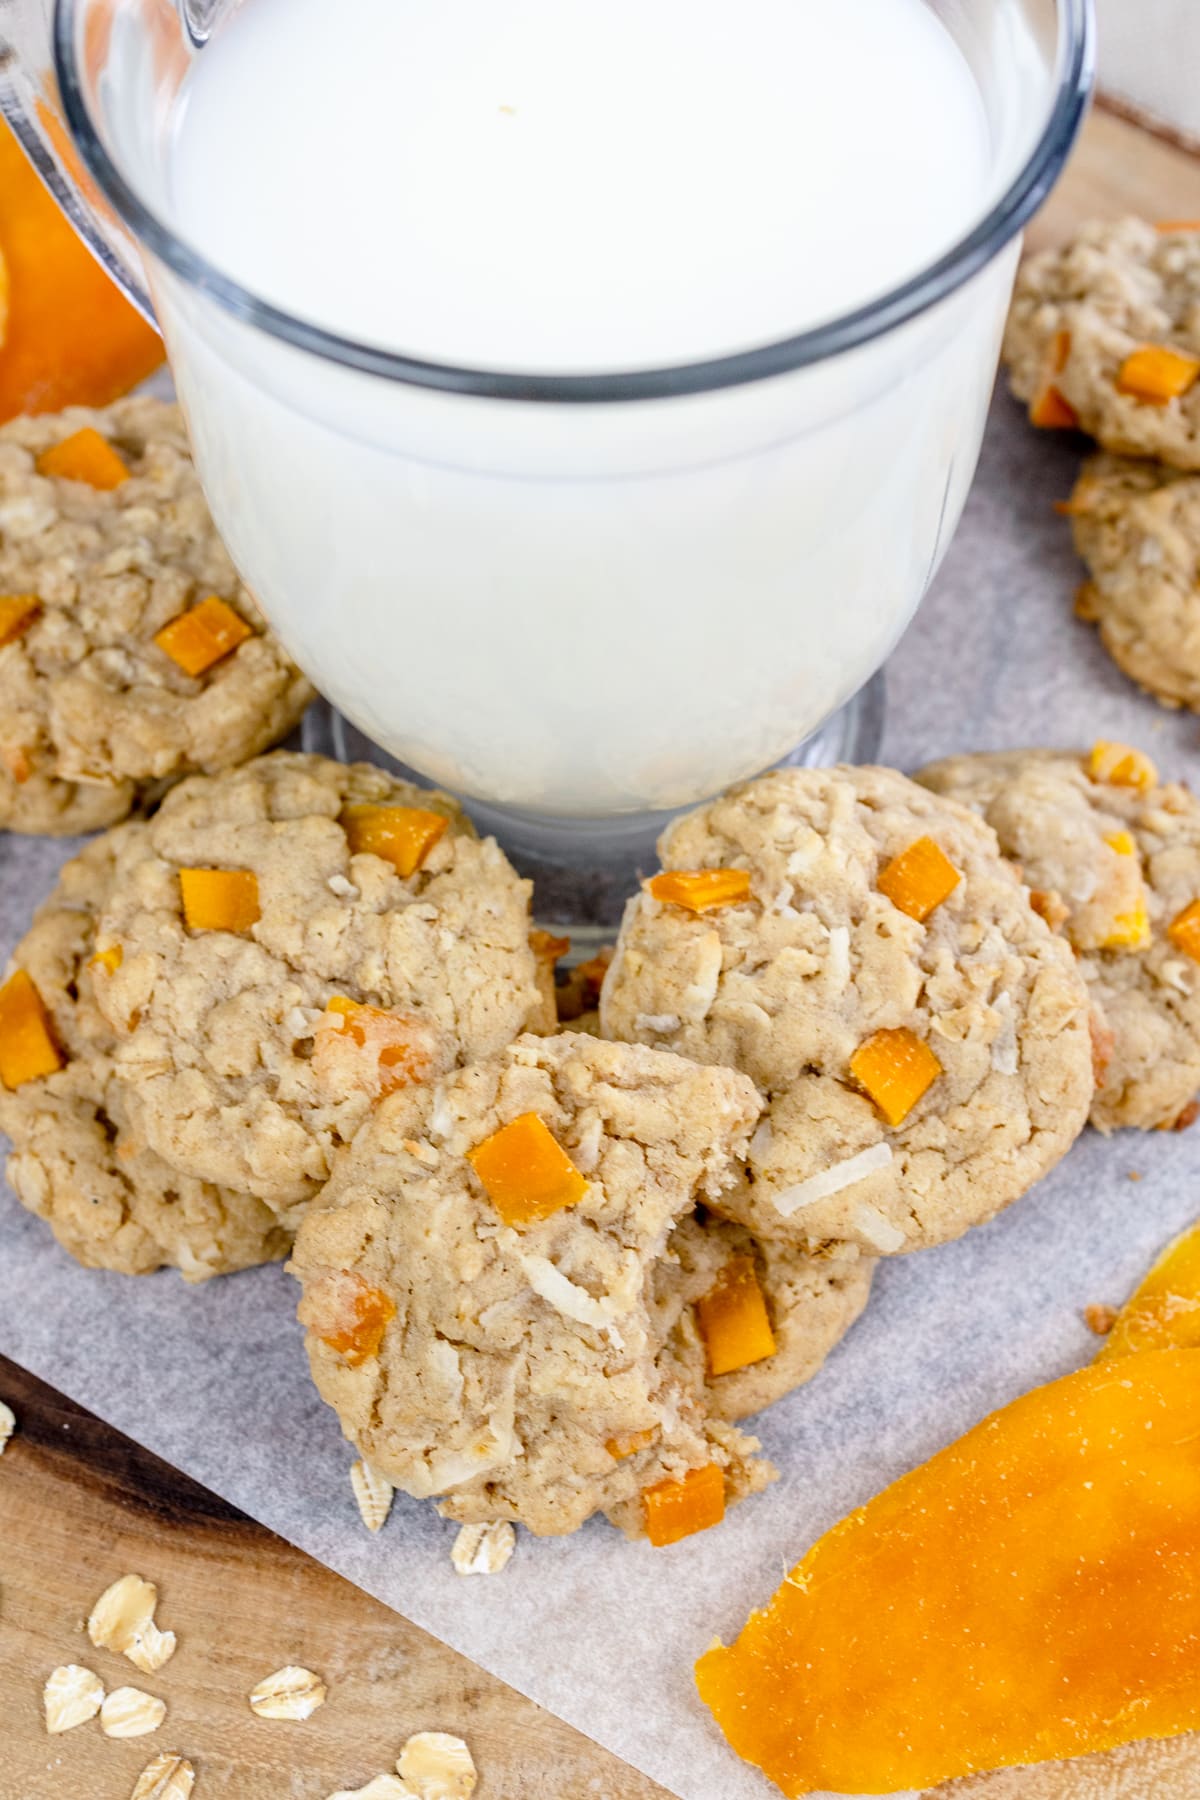 Large glass of milk surrounded by oatmeal mango cookies.